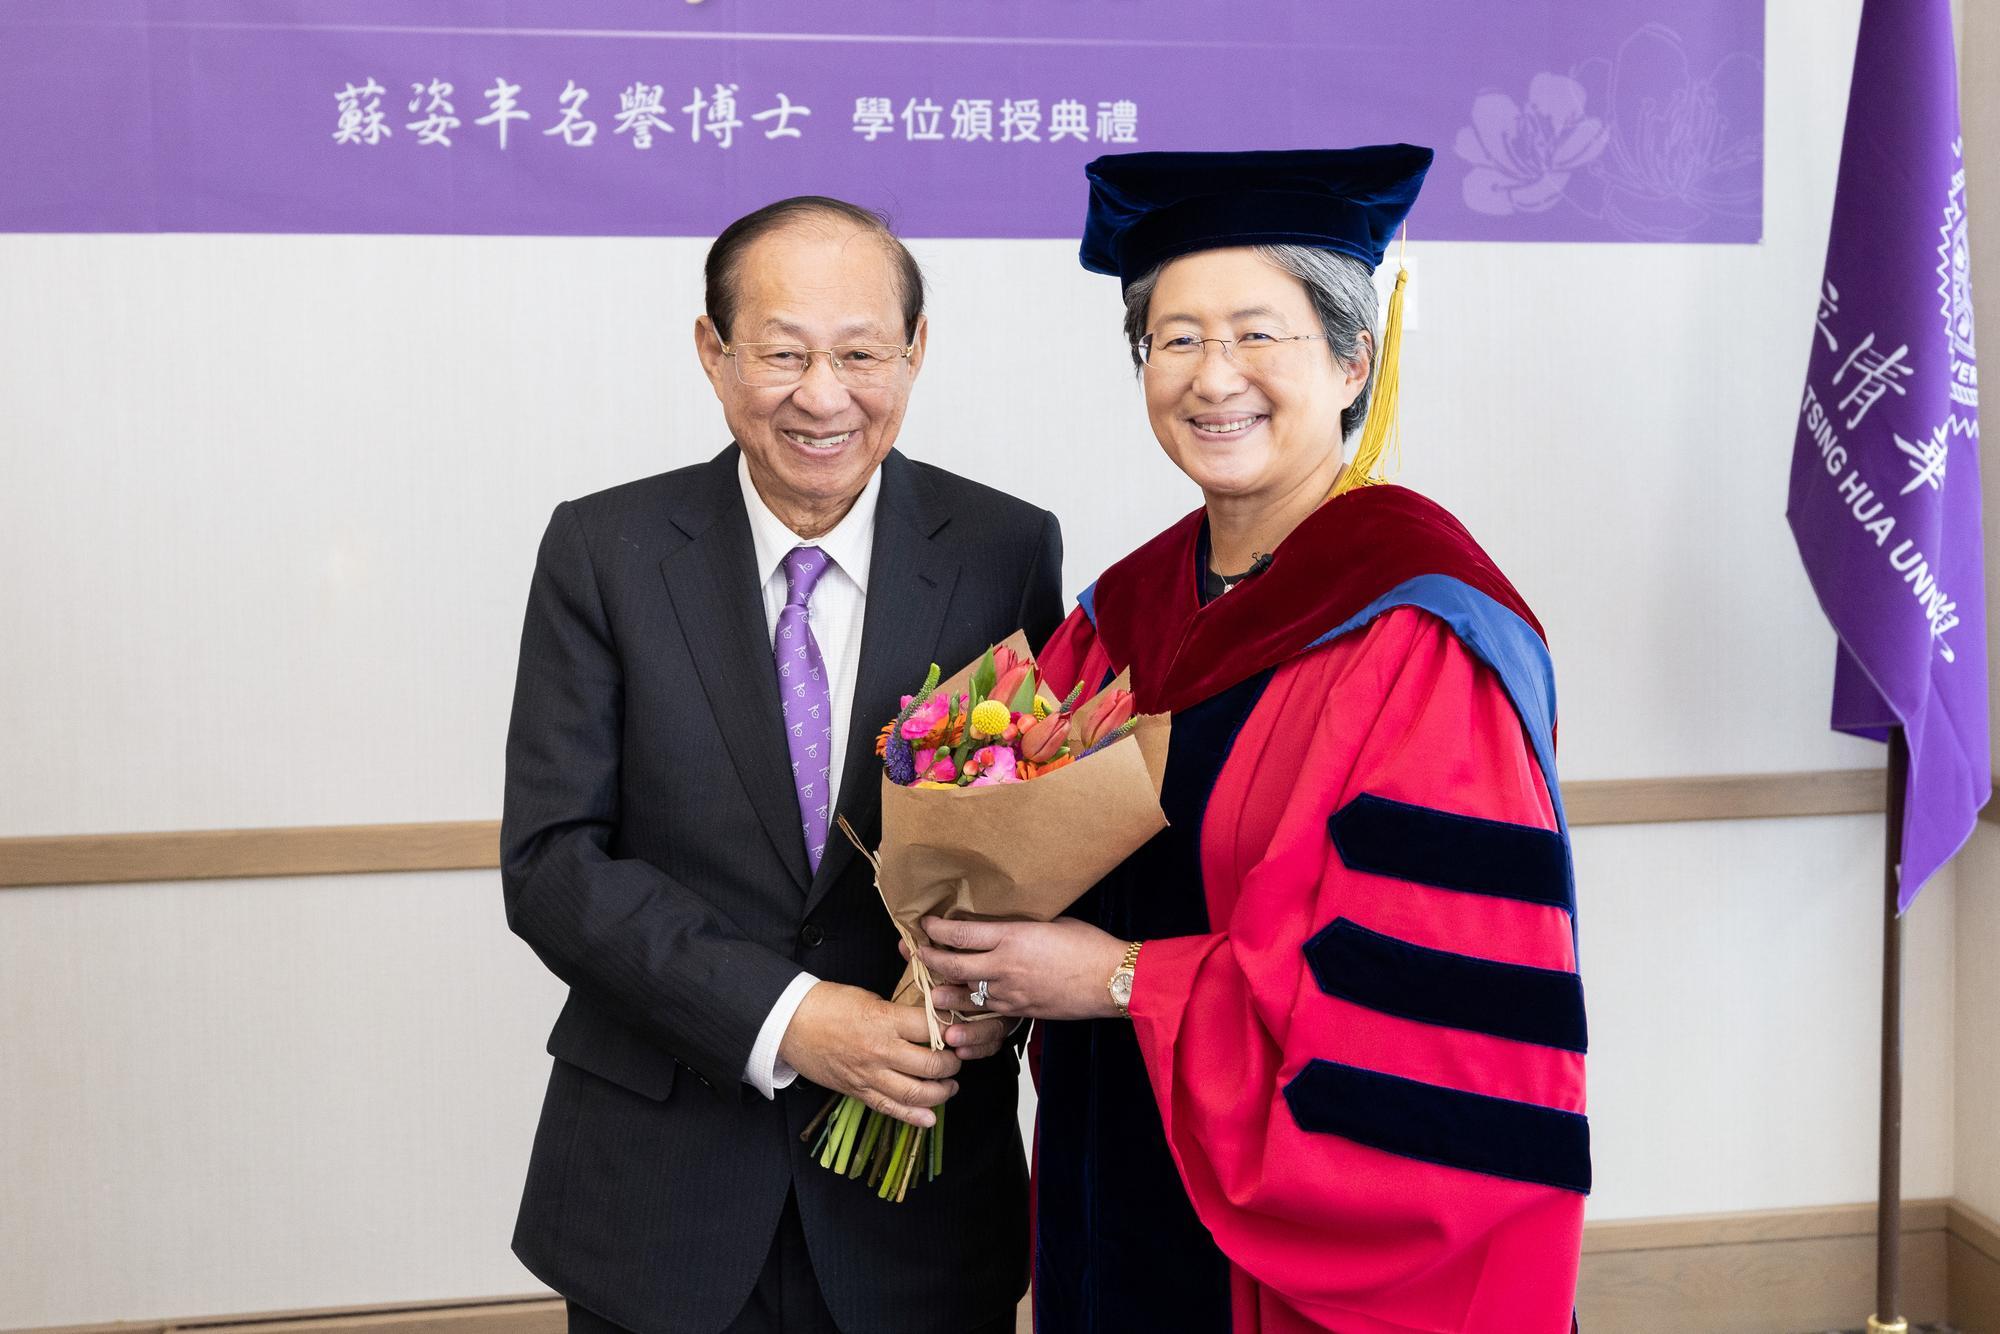 Chun-hwai Su (蘇春槐) (left) welcomed his daughter Lisa Su (蘇姿丰) to be part of the NTHU family by presenting a bouquet of flowers to her. 